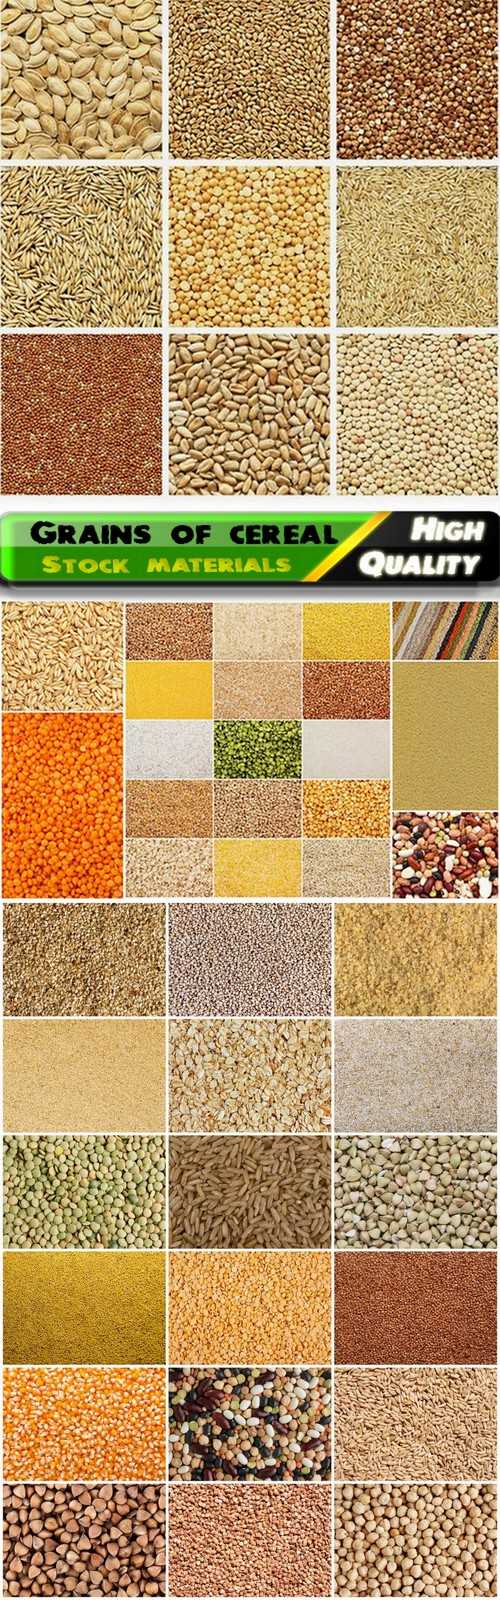 Textures of legumes and grains of cereals - 25 HQ Jpg